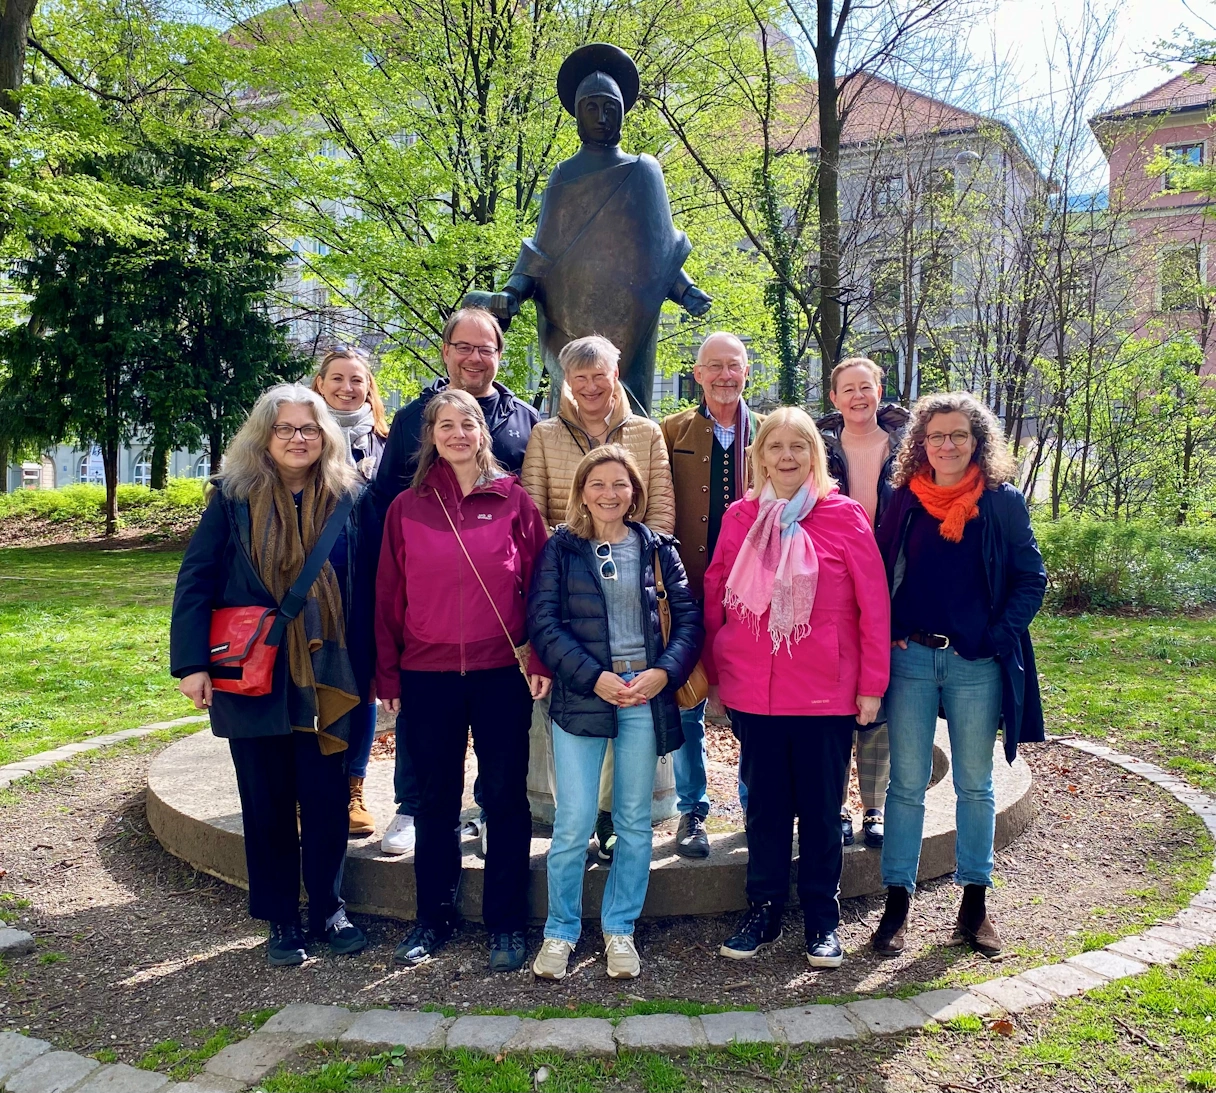 The Herz und Heimat city tours team together as a group